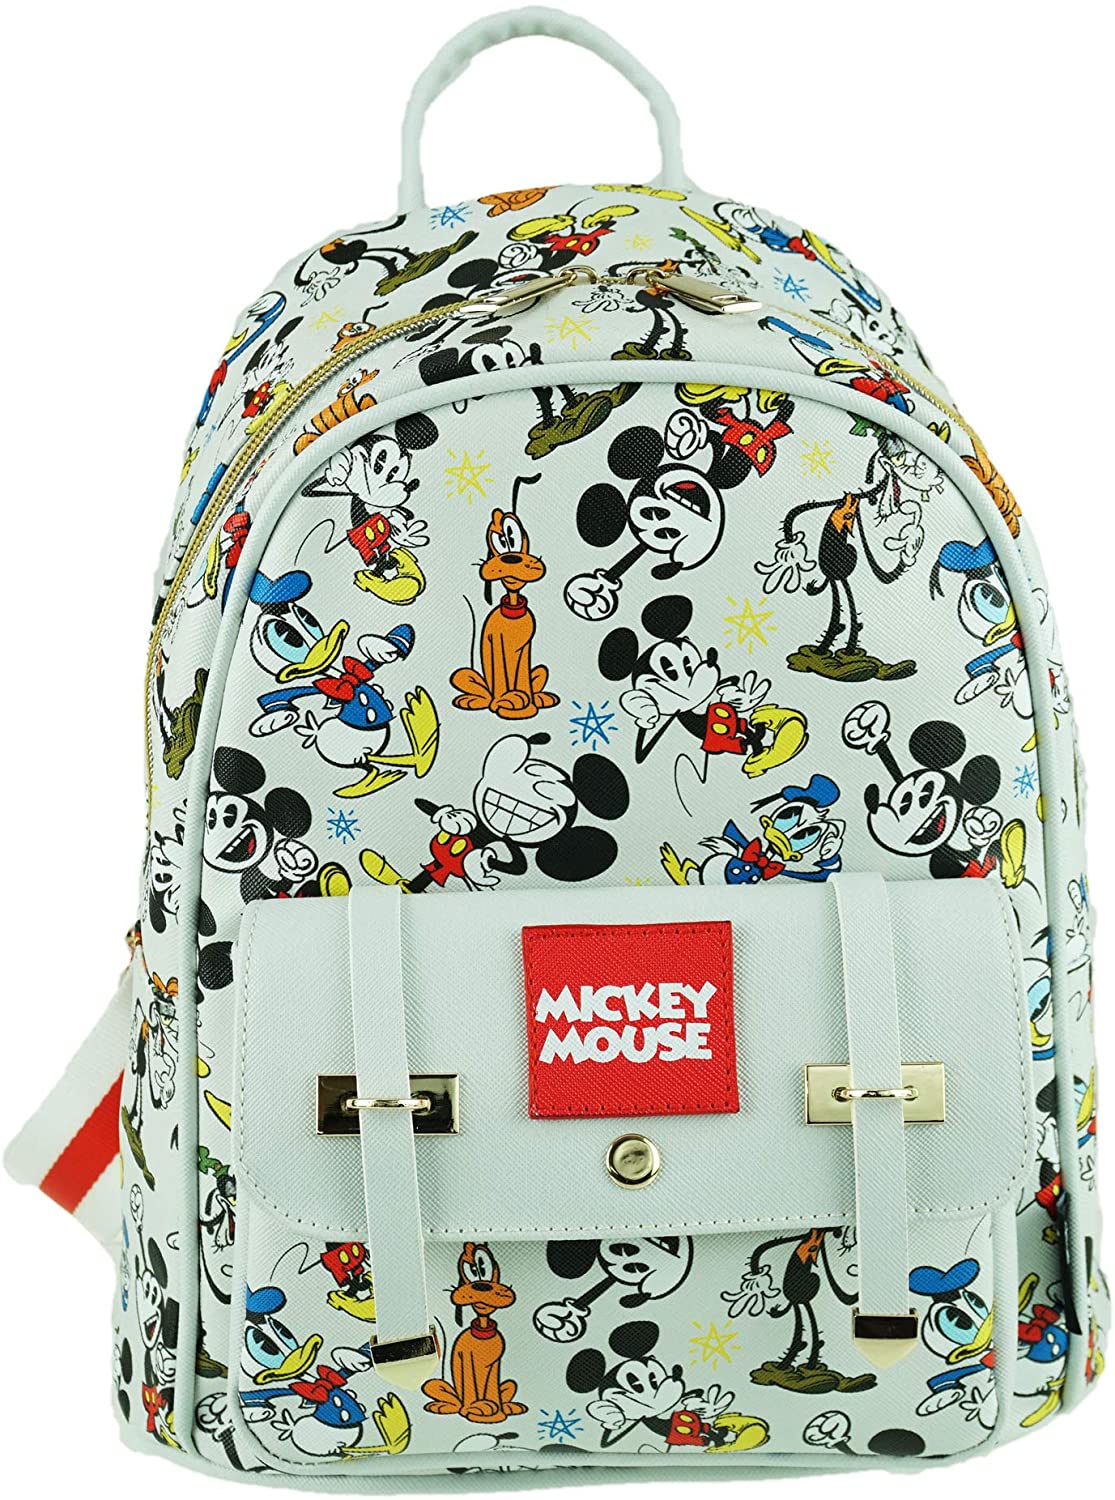 Disney's Mickey Mouse 11" Faux Leather Mini Backpack - GTE Zone